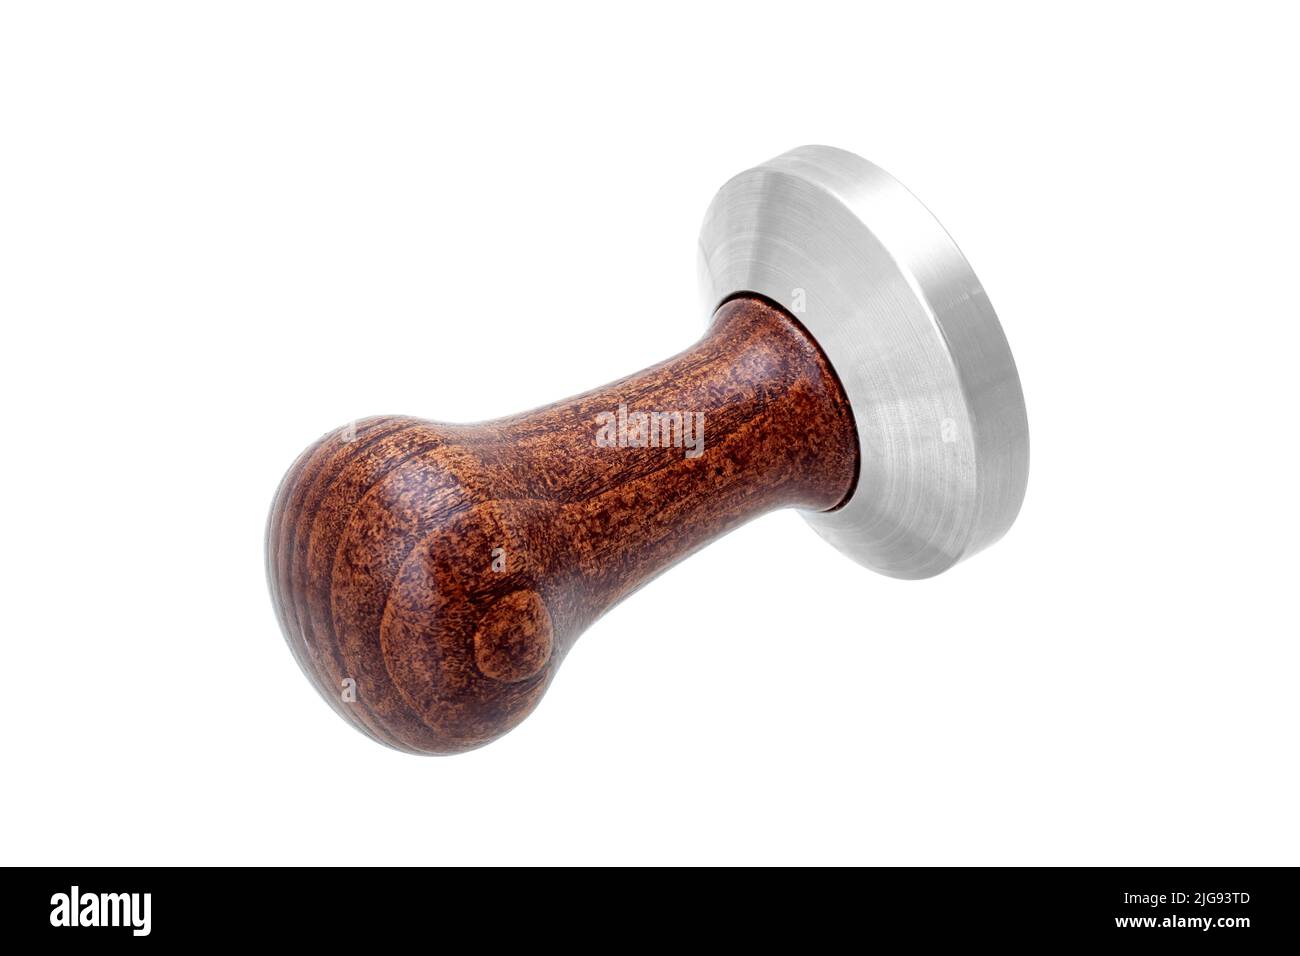 Barista tool coffee tamper with brown wooden handle and stainless still press, object isolated on white. Barman accessory for making coffee tablet, vi Stock Photo